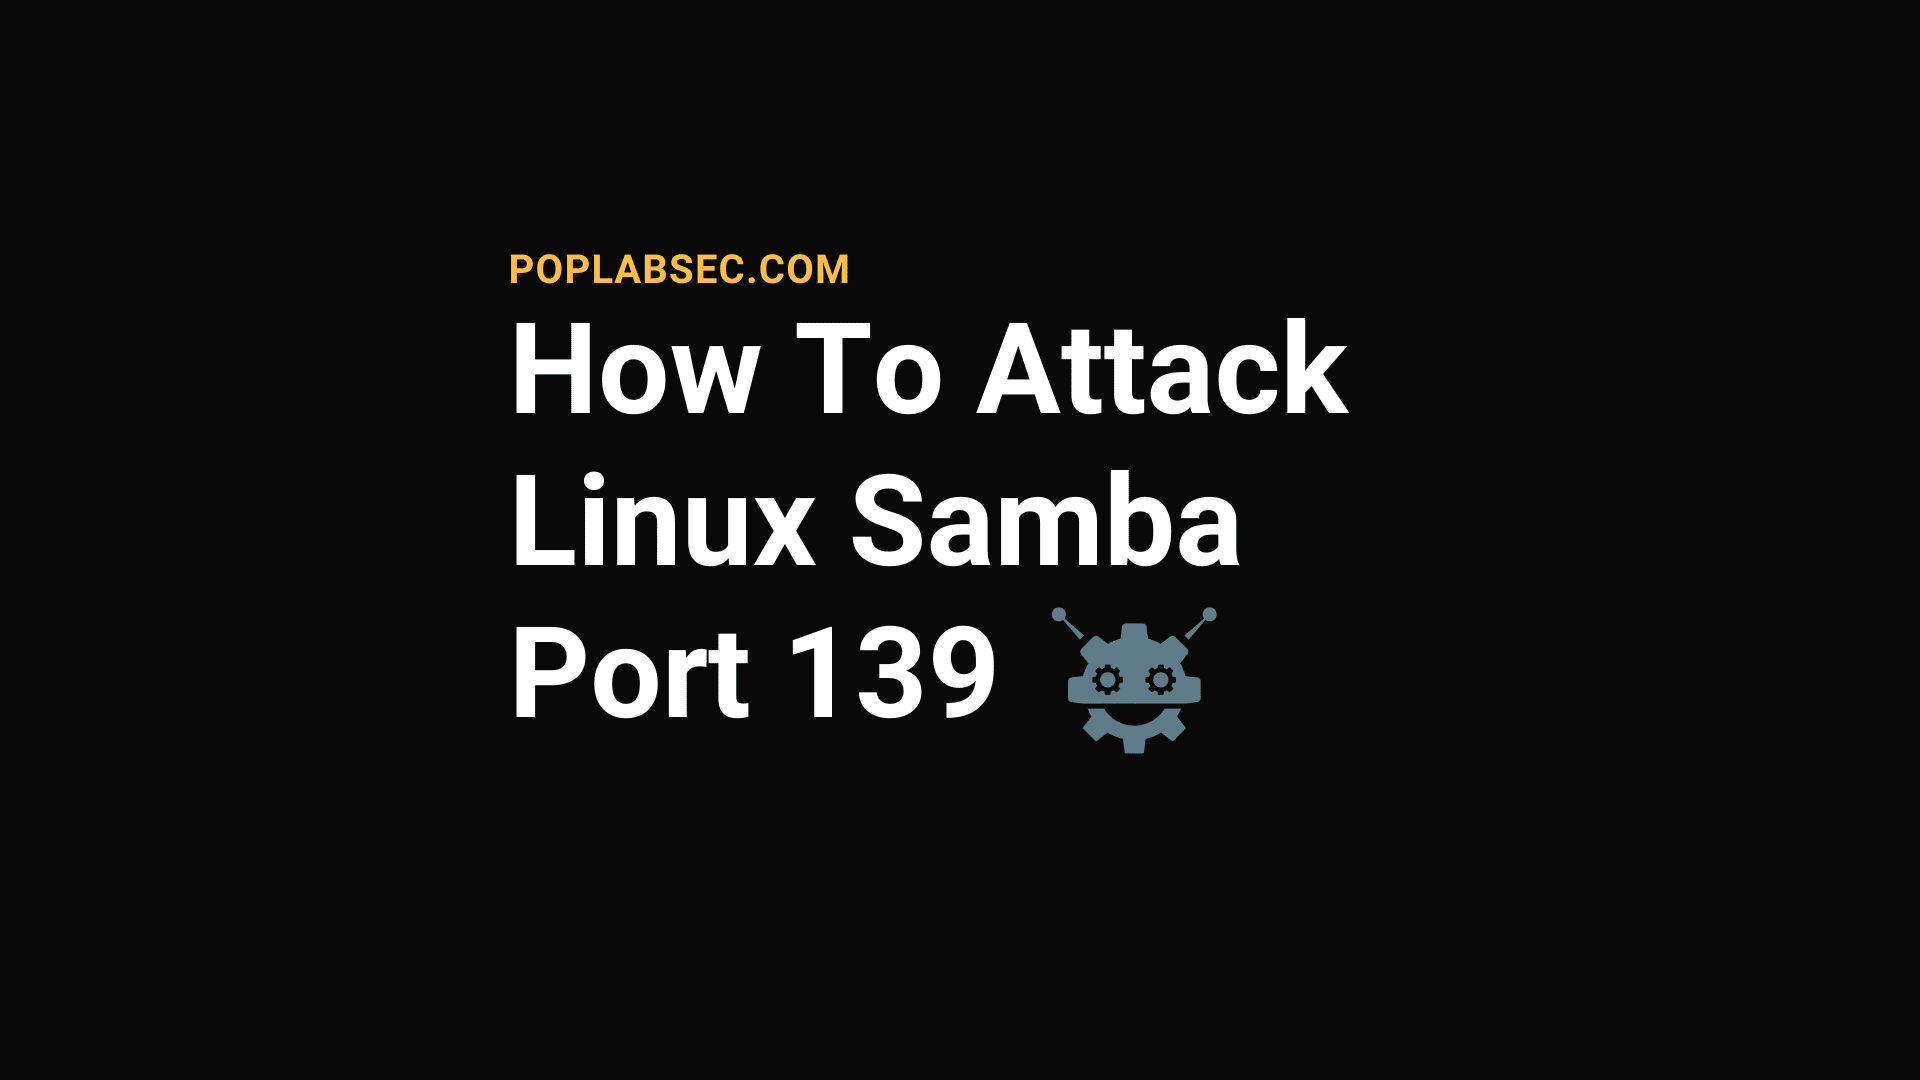 How To Attack Linux Samba Port 139